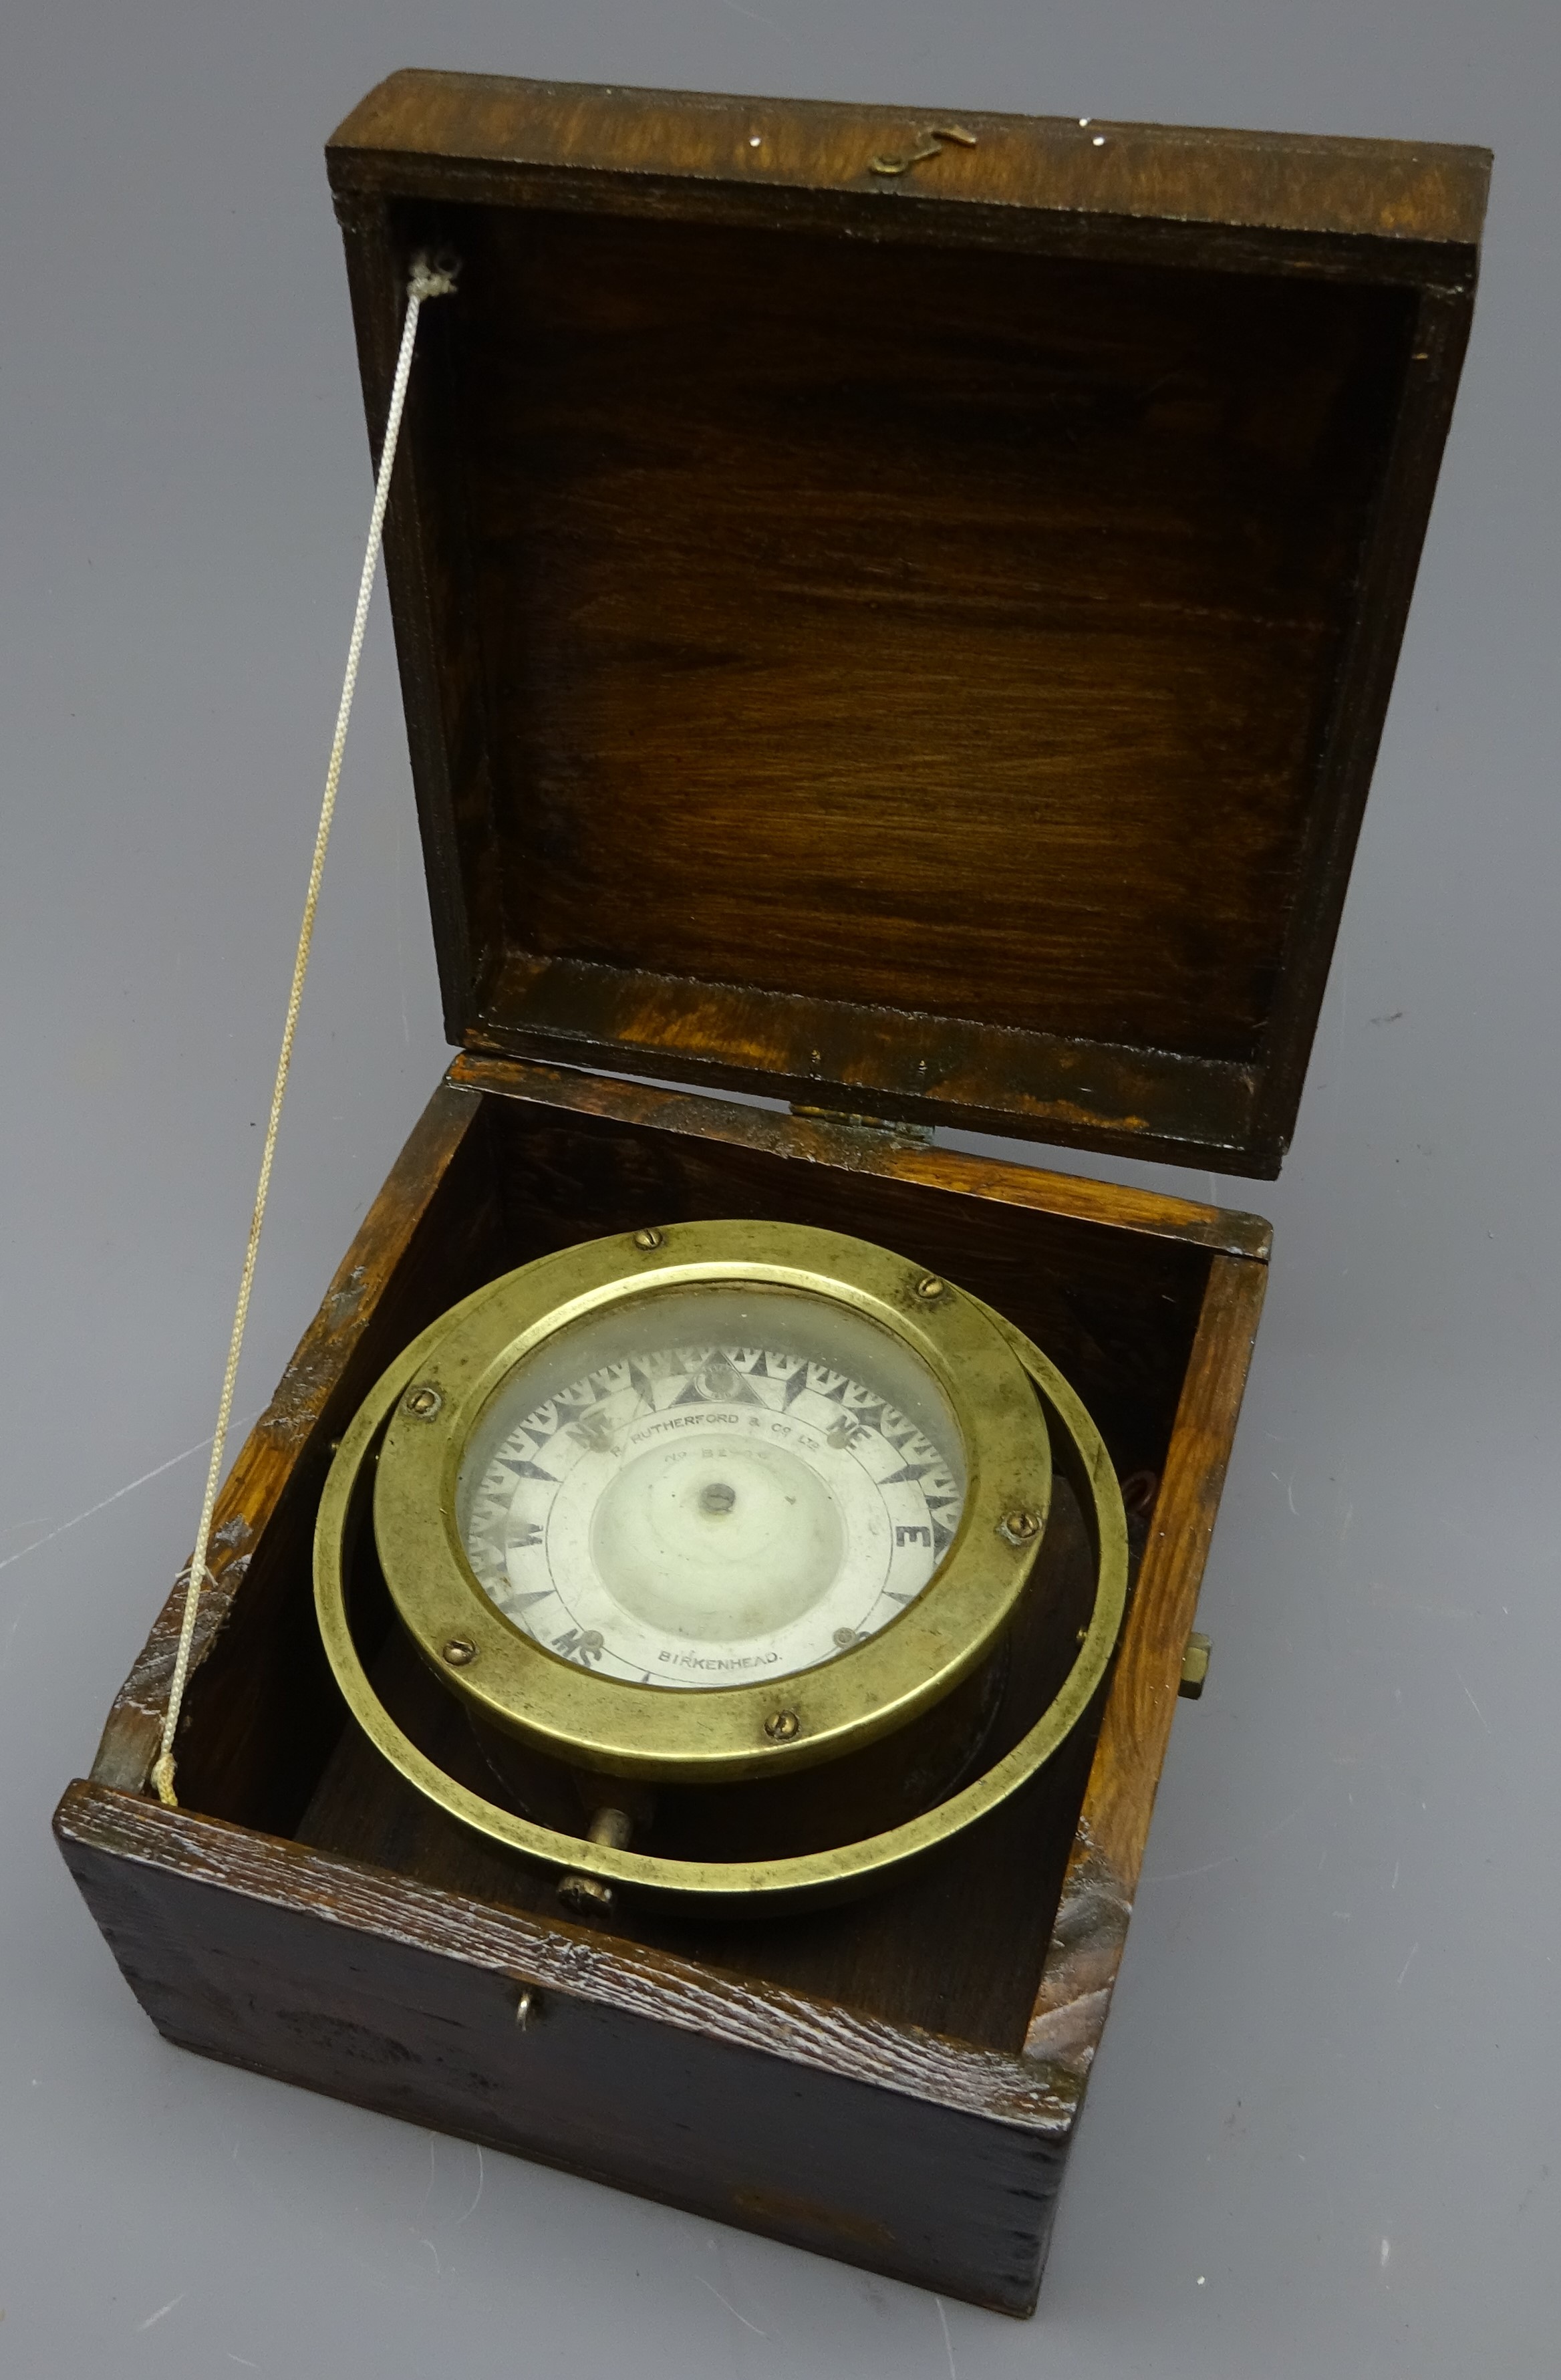 Brass cased ship's compass by Rutherford & Co.